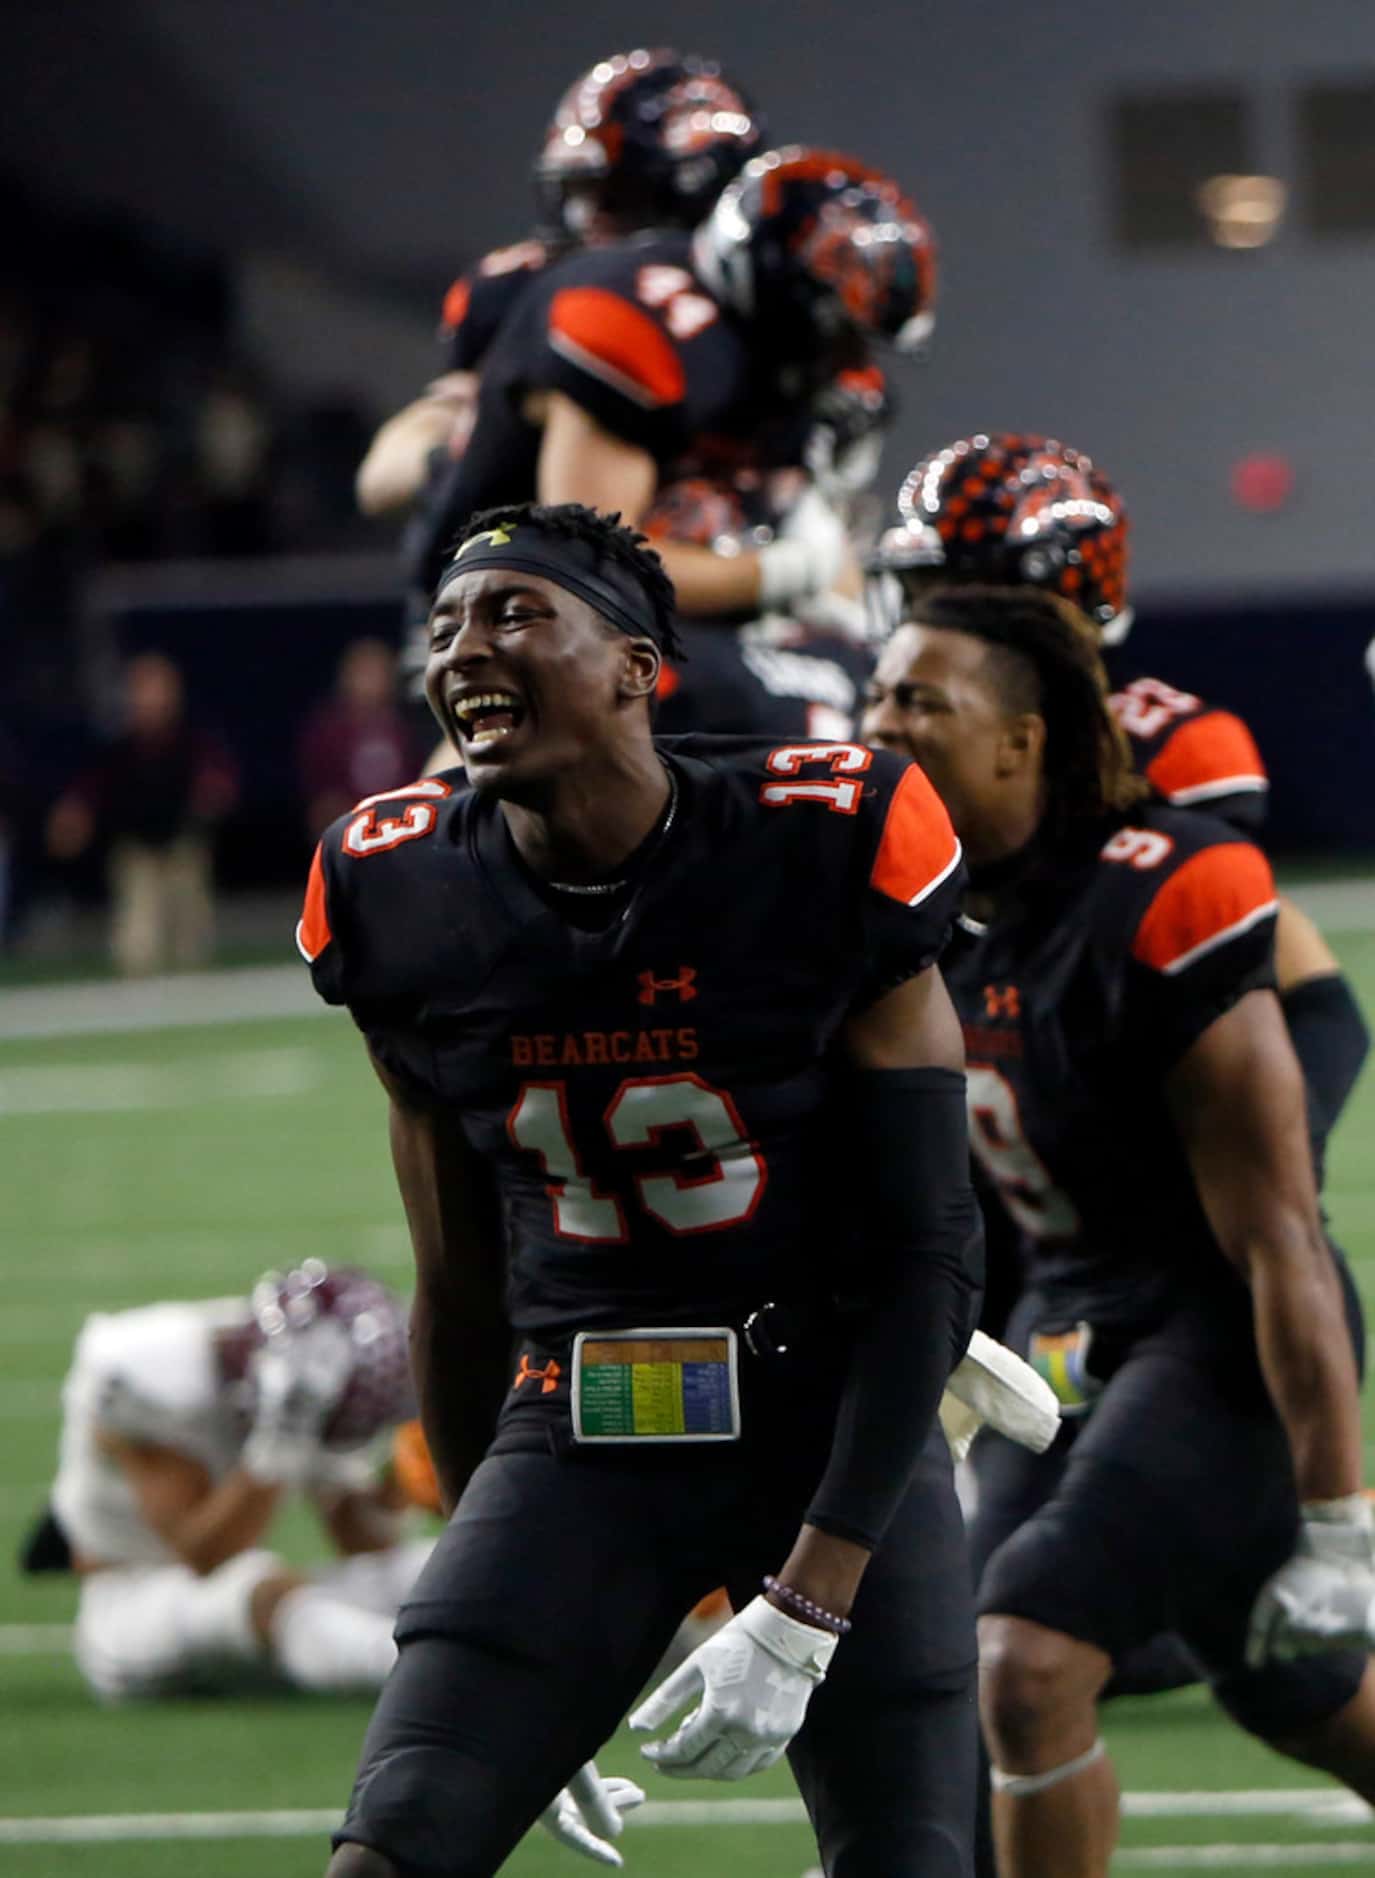 Aledo Bearcats players, including Money Parks (13) celebrate their 43-36 overtime victory...